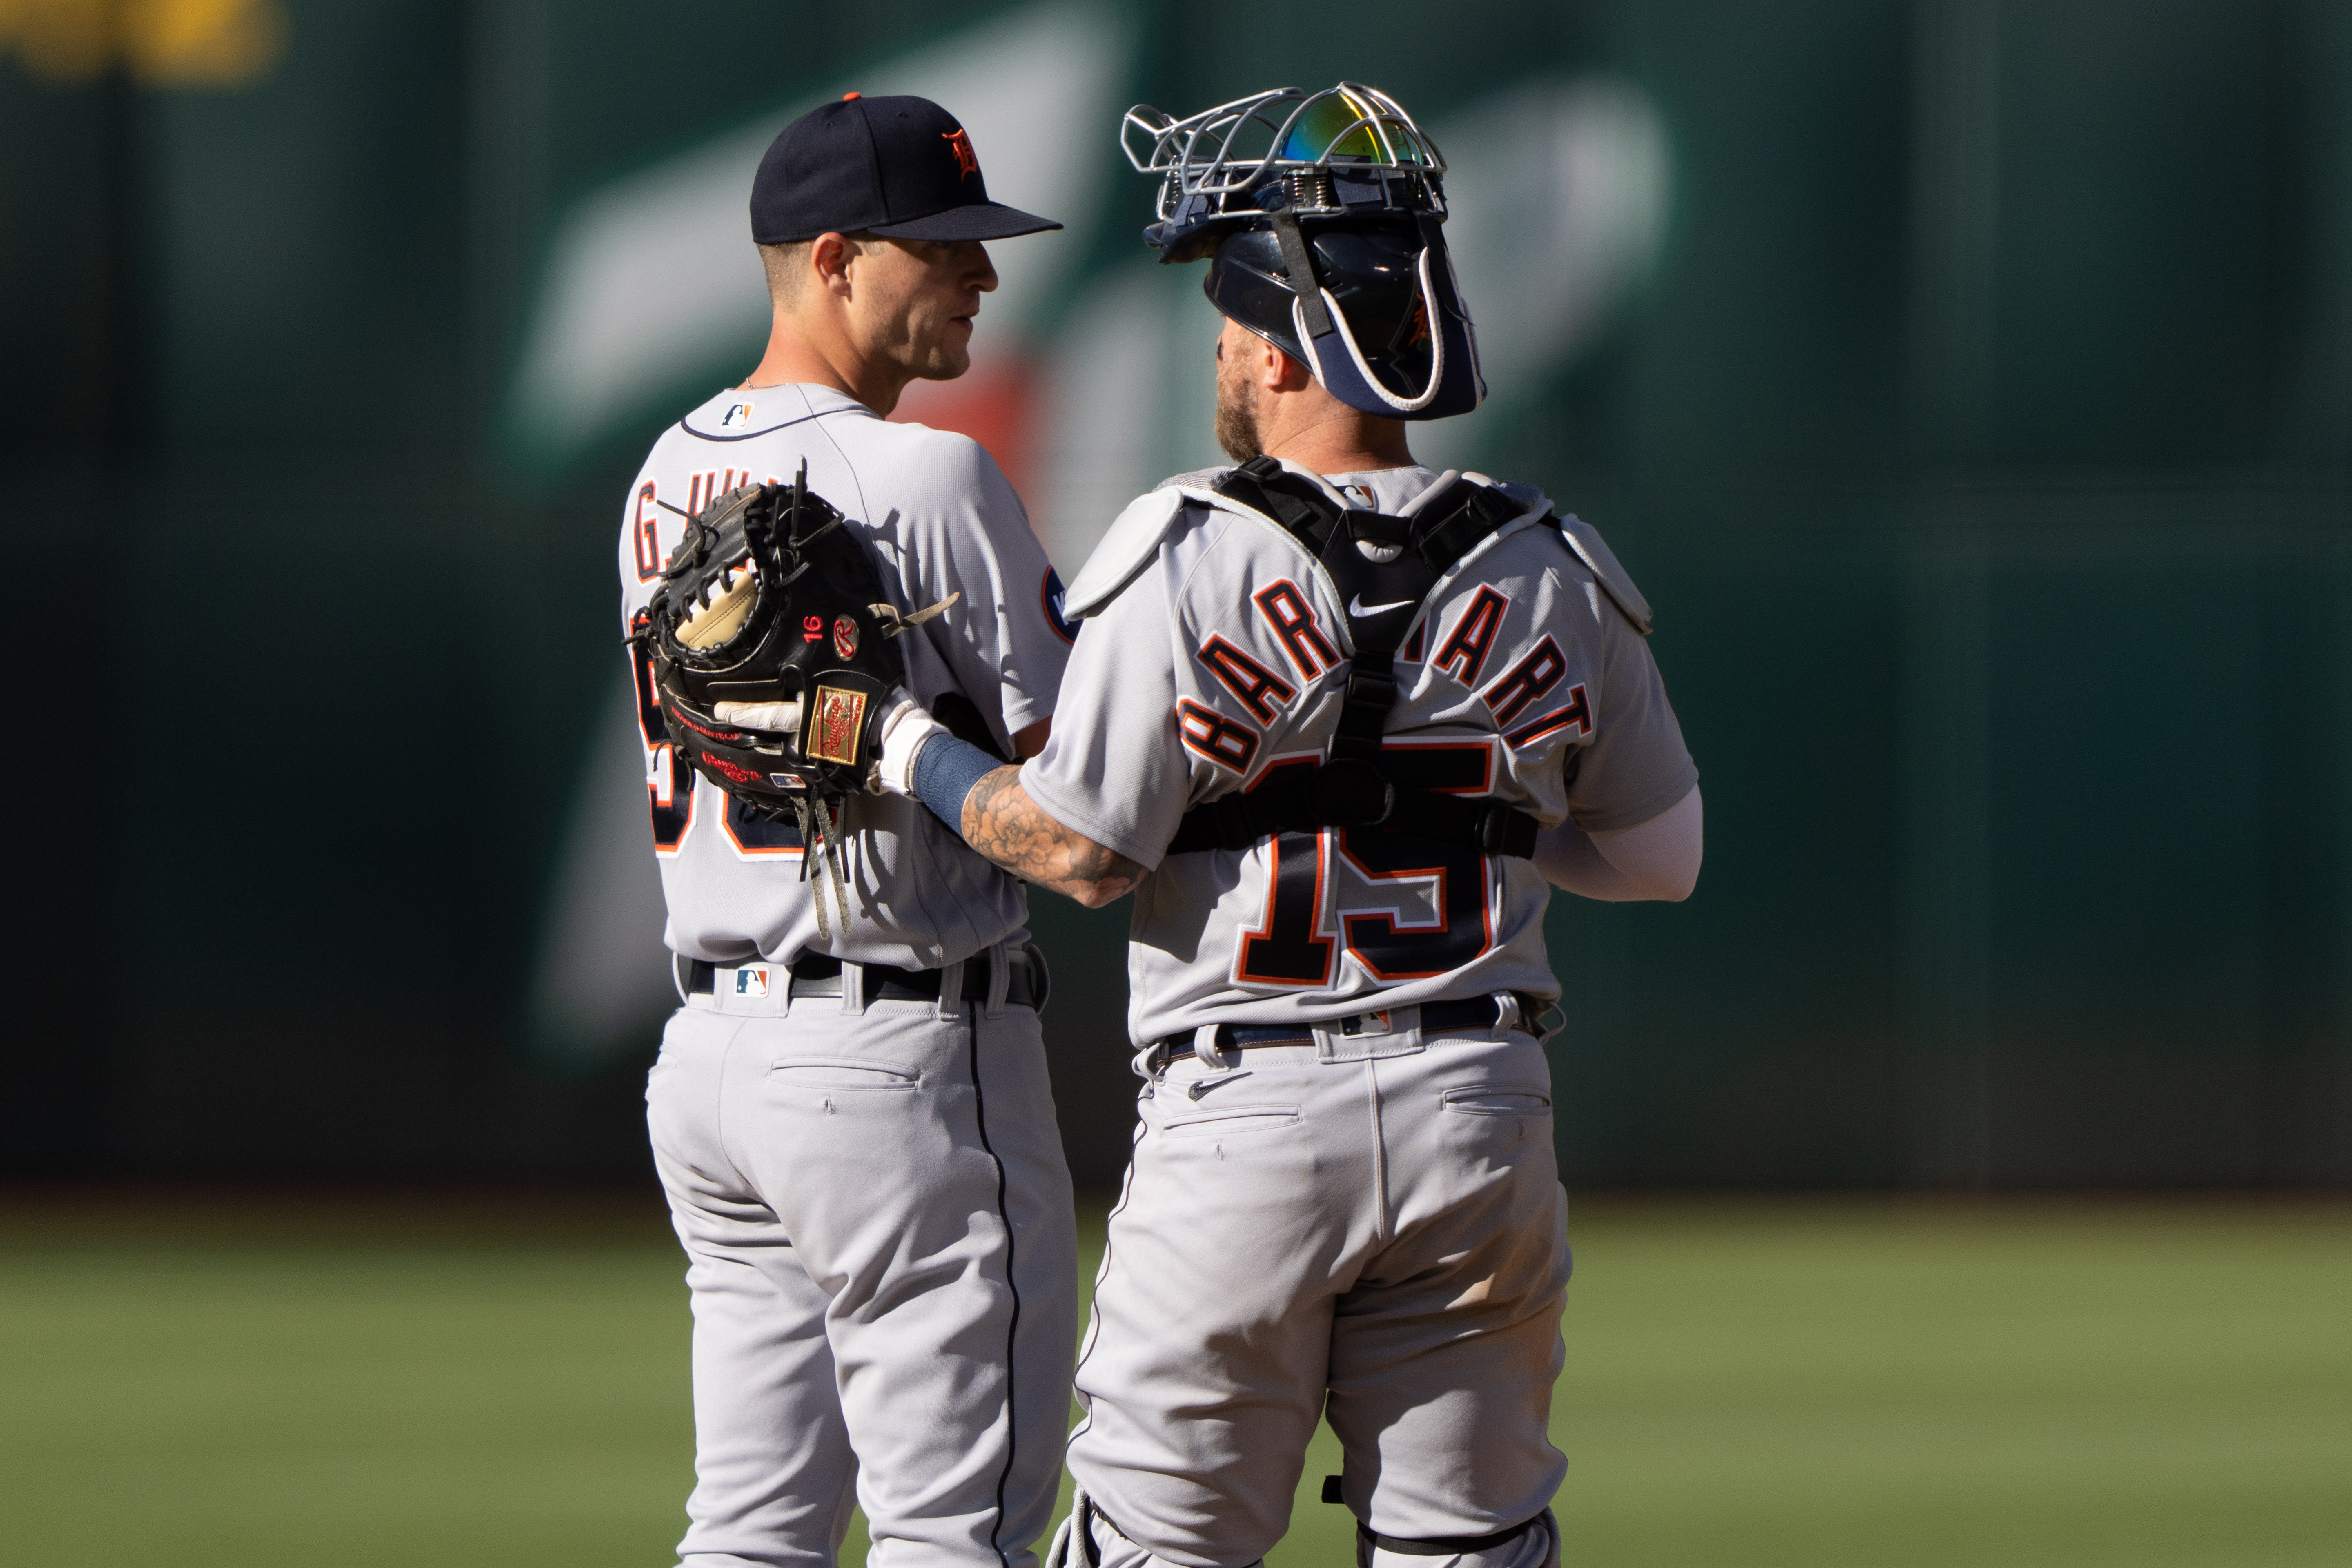 MLB: Game Two-Detroit Tigers at Oakland Athletics